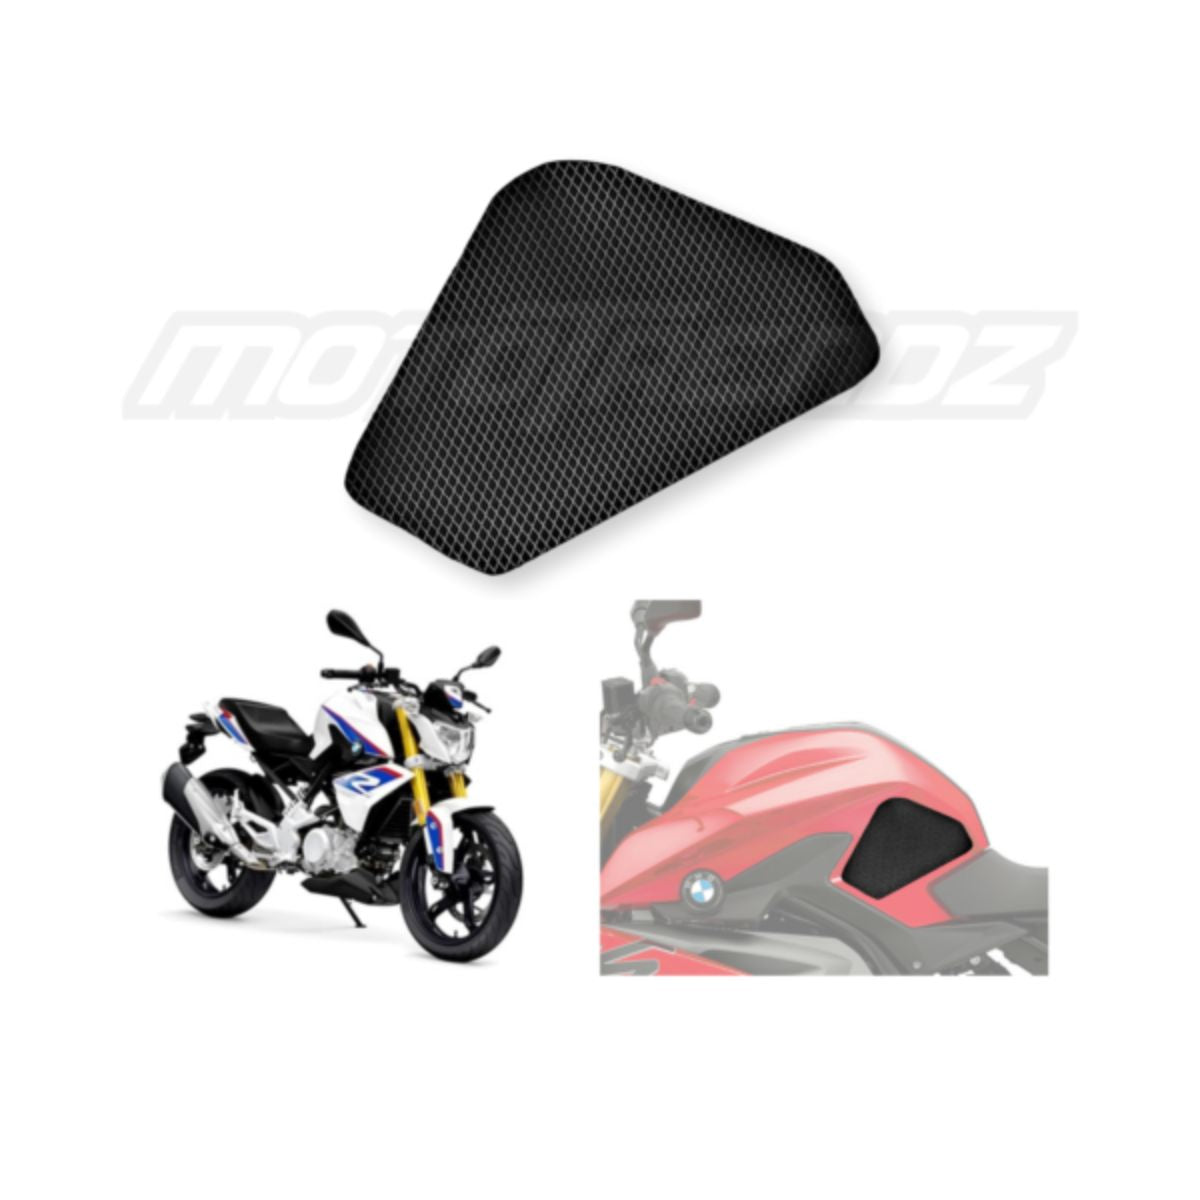 Traction Pads for BMW G 310 R 2020 Model 1